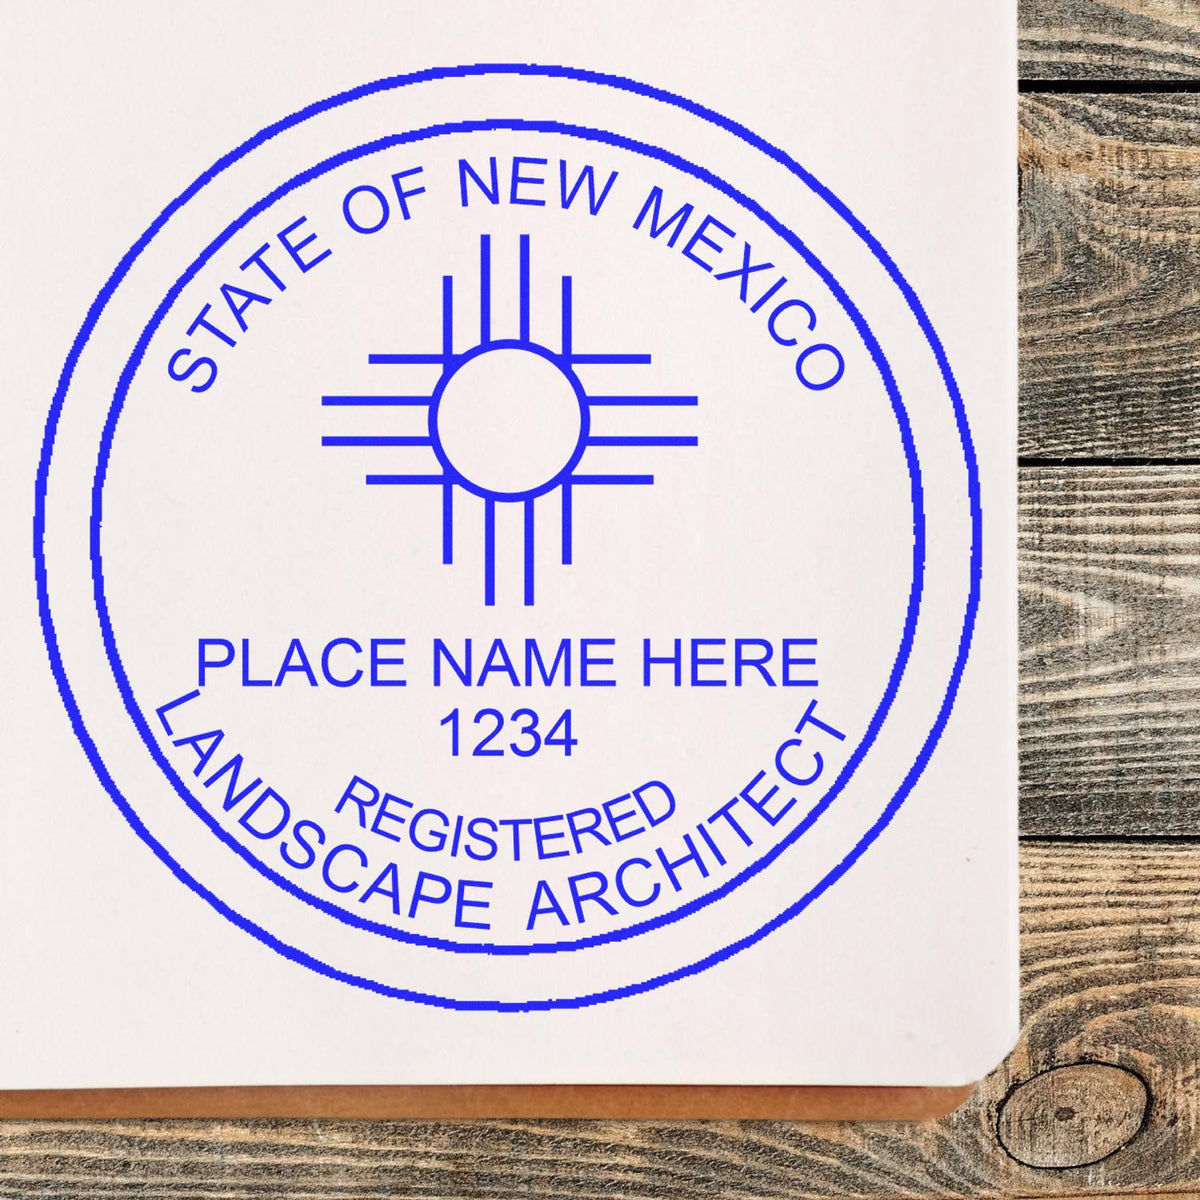 The Digital New Mexico Landscape Architect Stamp stamp impression comes to life with a crisp, detailed photo on paper - showcasing true professional quality.